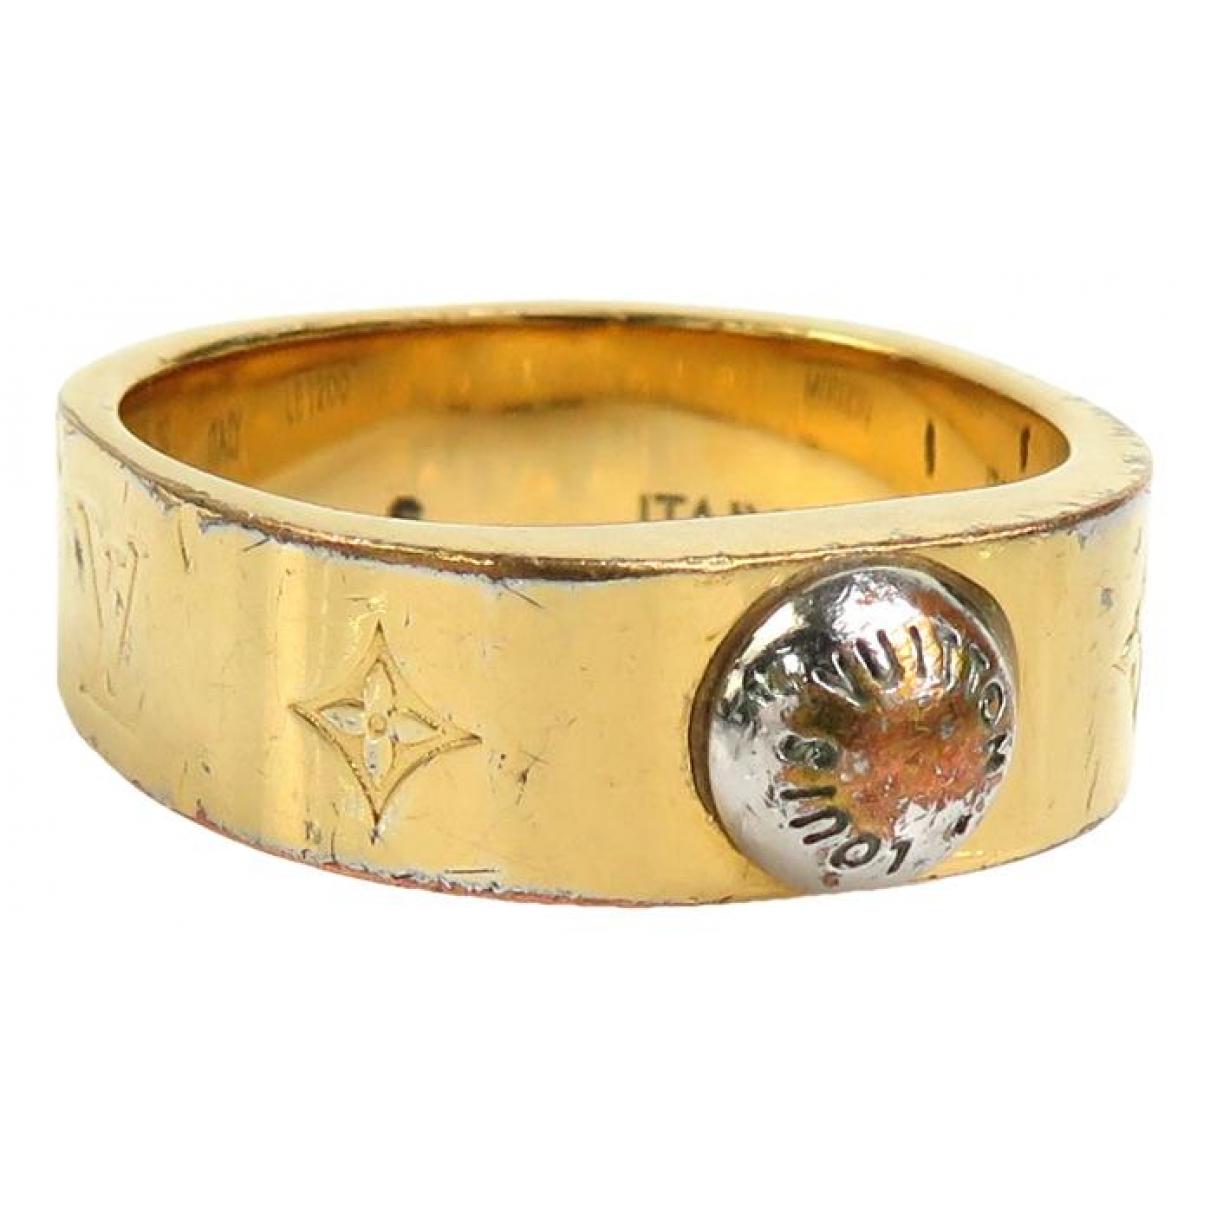 Louis Vuitton Gold Monogram Band Ring Available For Immediate Sale At  Sotheby's